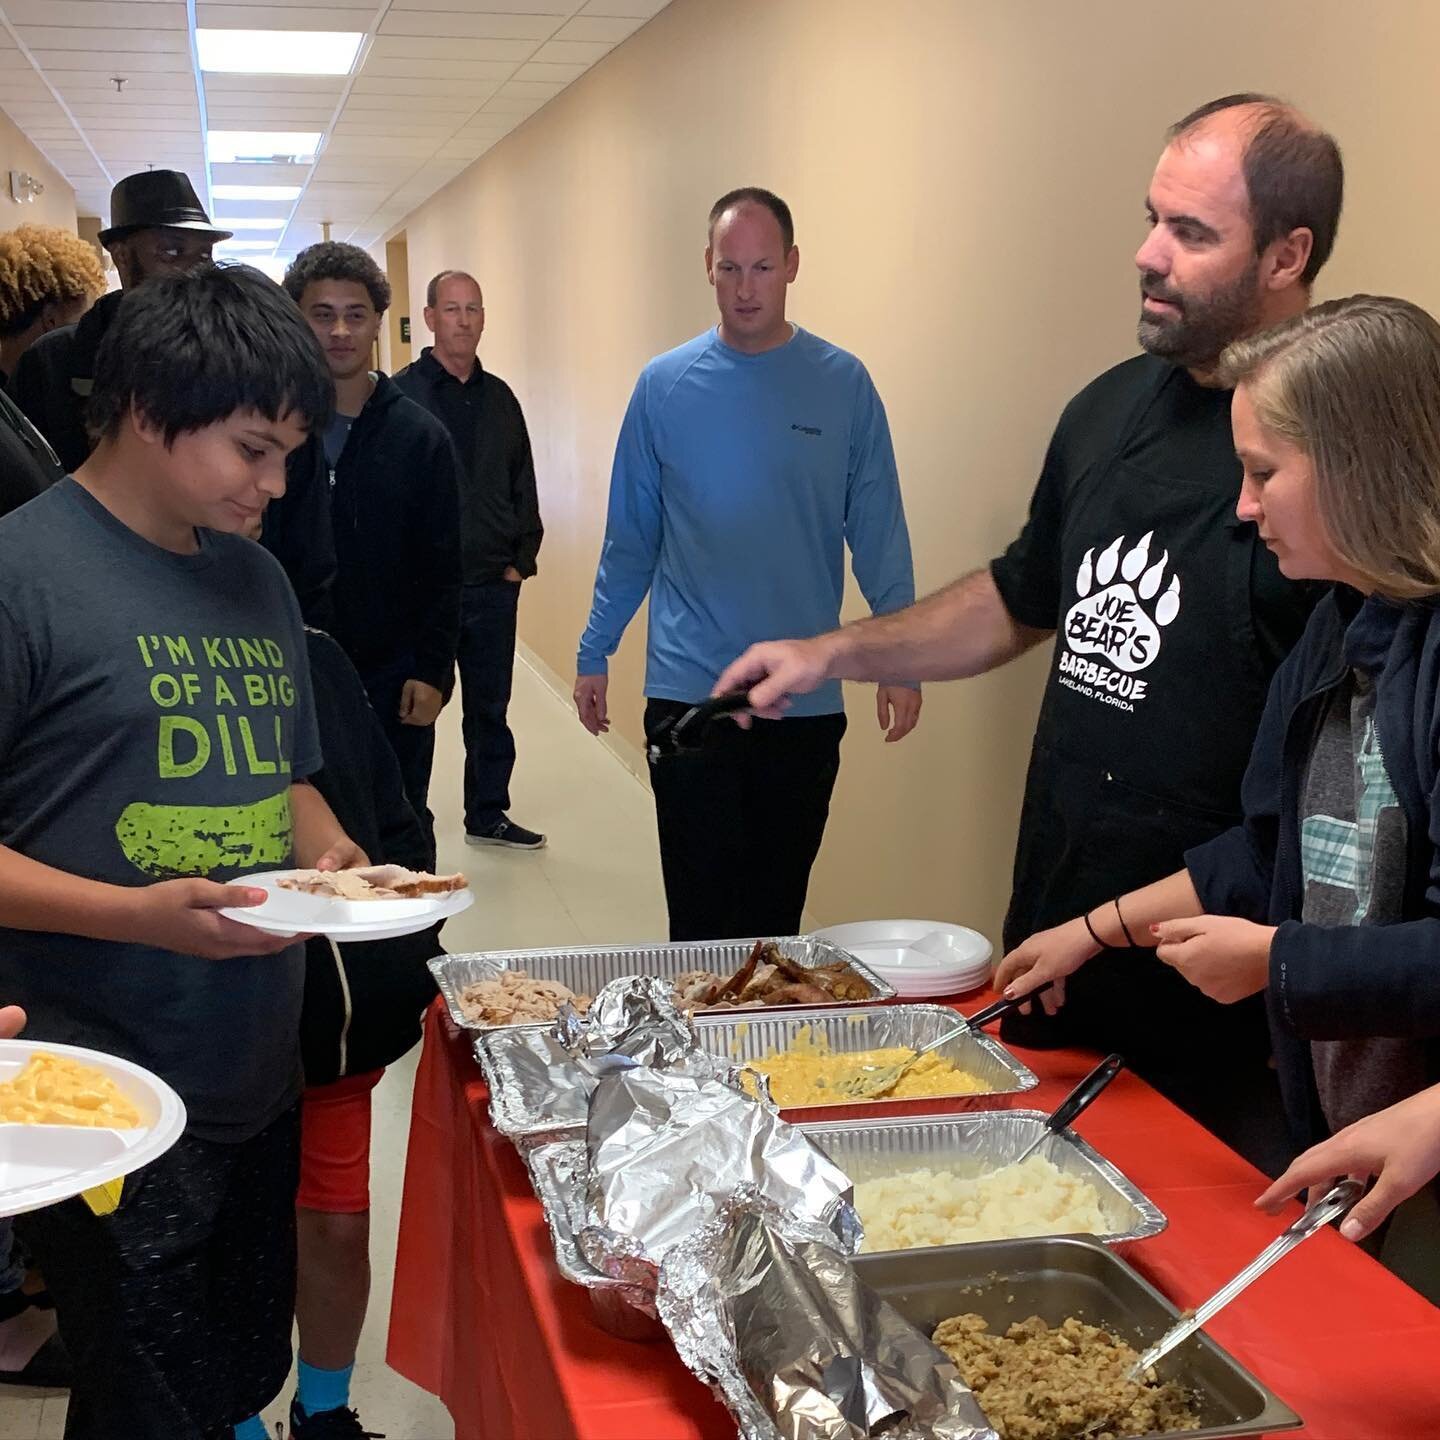 Yesterday, Joe Bear prepared a holiday lunch of turkey, mashed potatoes, stuffing, Mac and cheese and more for the @leverageministries Breakfast Club Christmas party. These at-risk teenagers from Lakeland enjoyed a morning of games, food, gifts and l